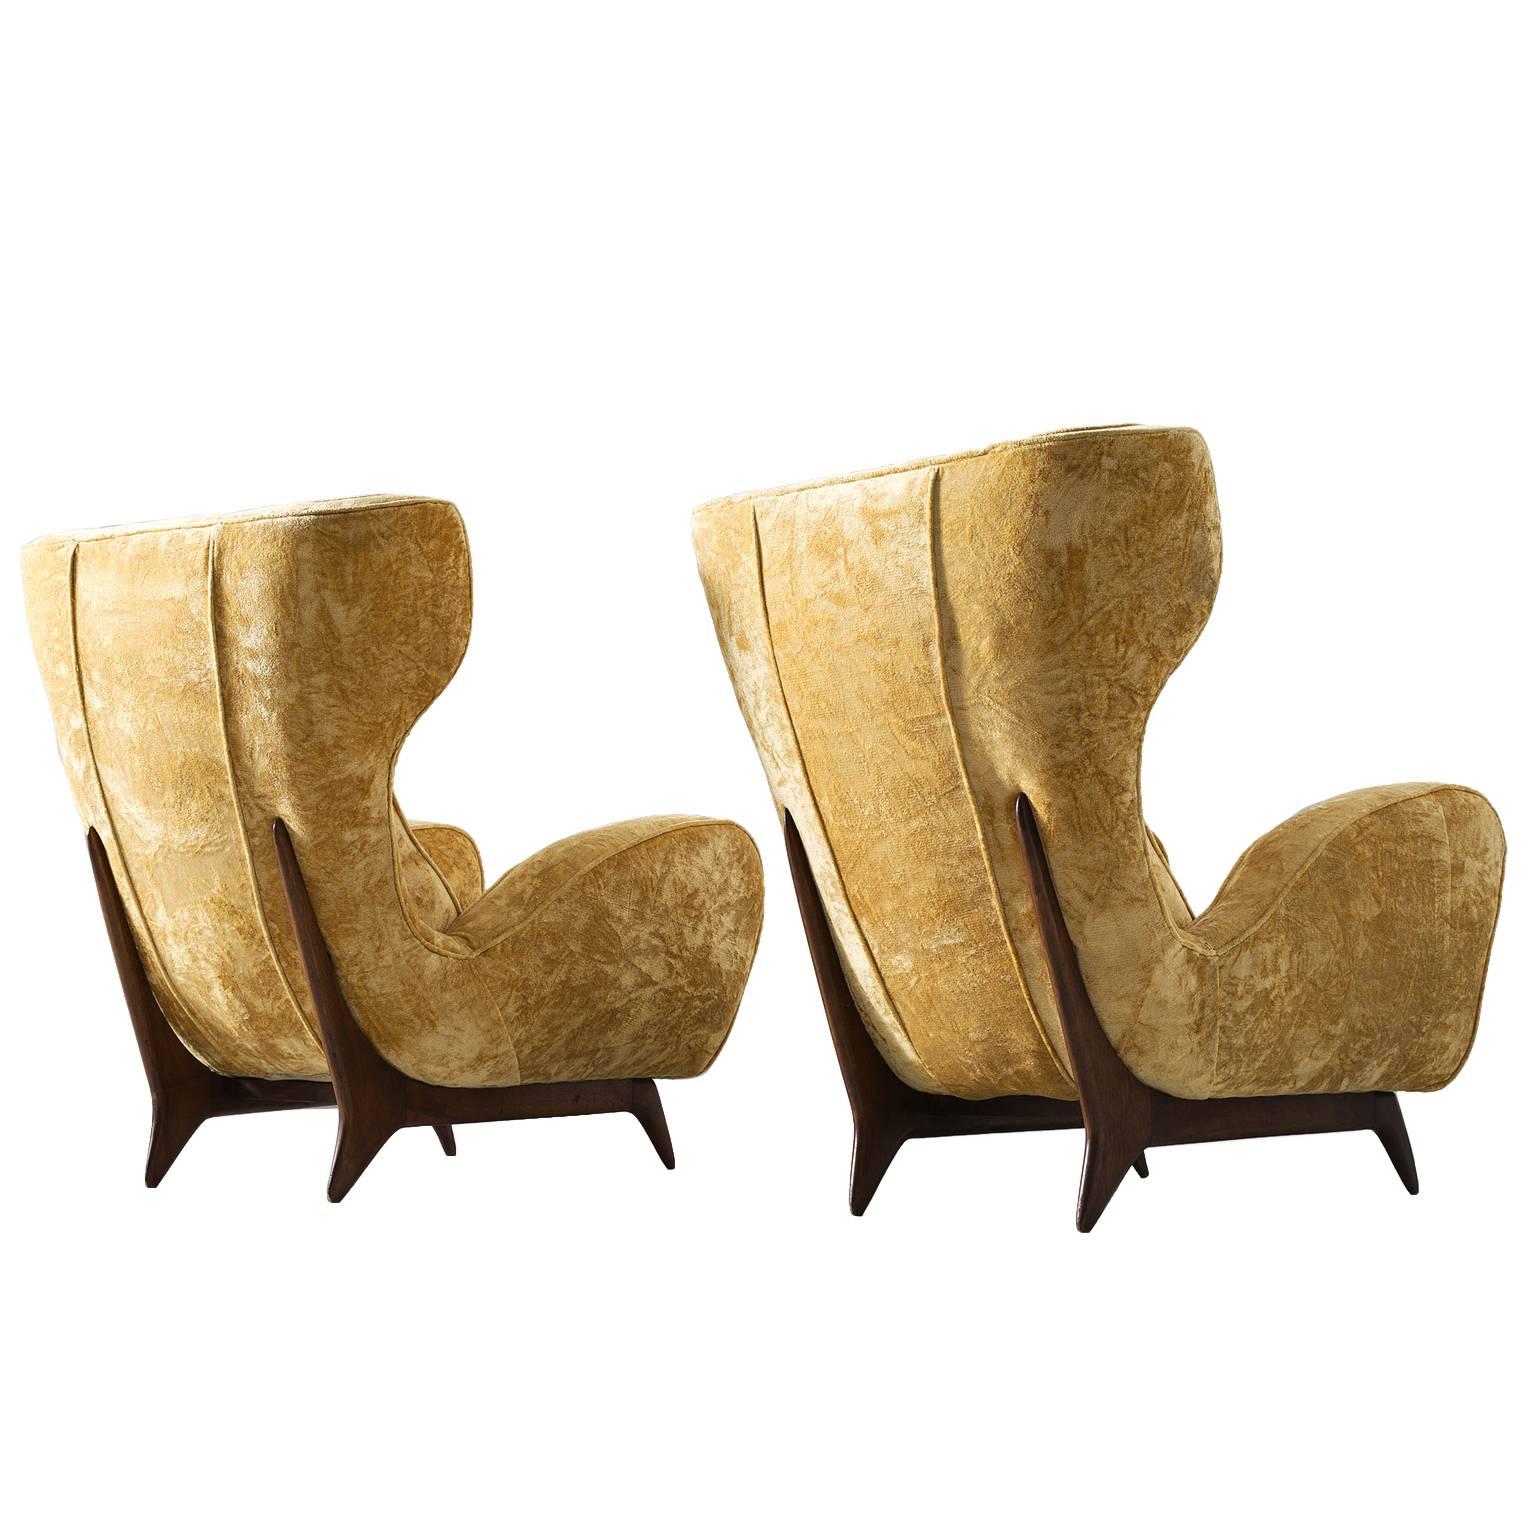 Pair of Large Italian Wingback Chairs